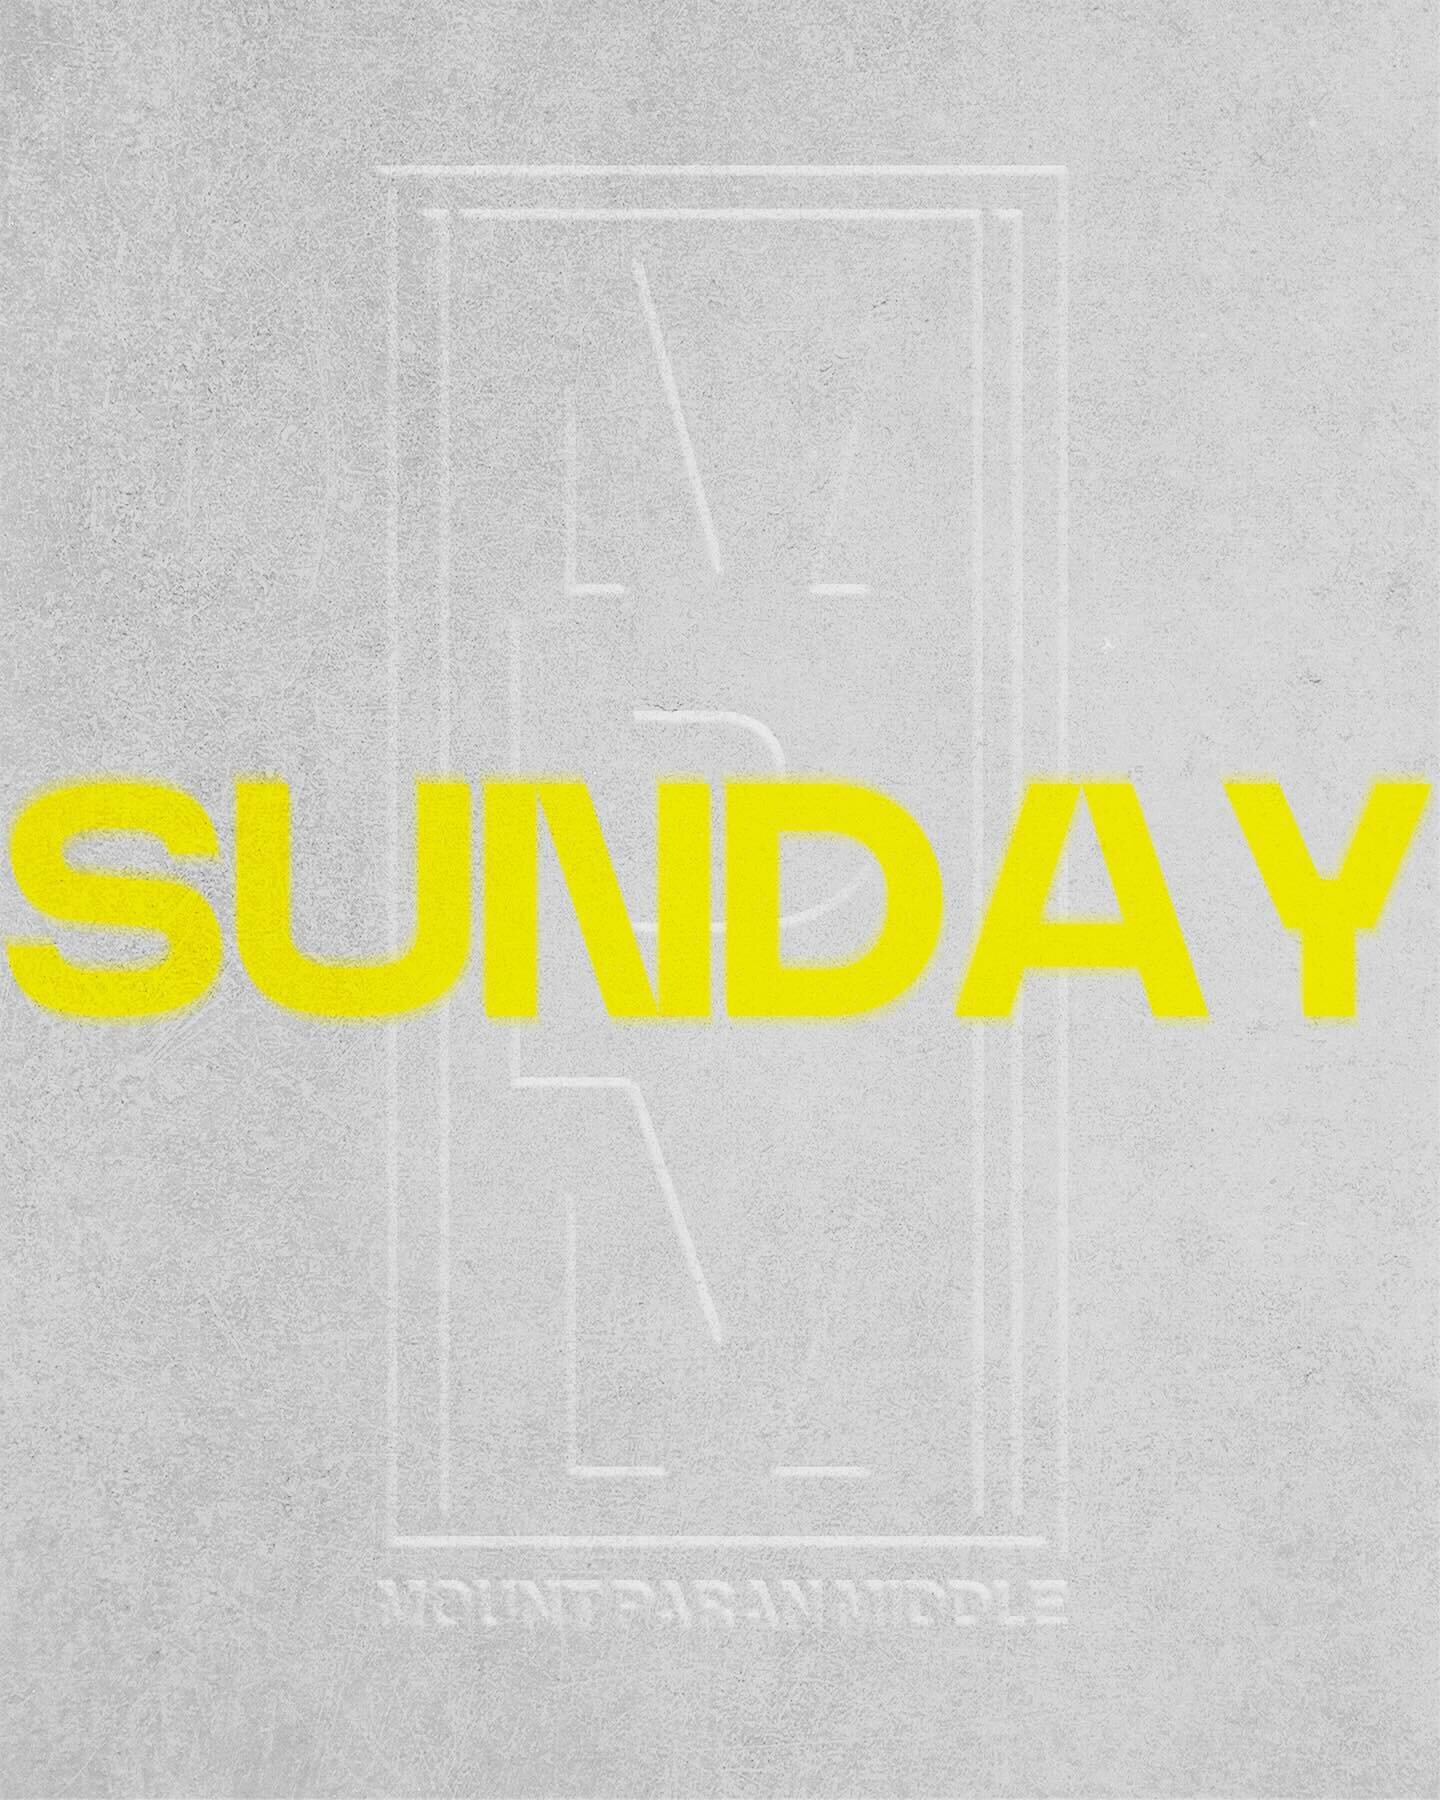 Head down to the Youth Center for Bible Study at 9am, and Youth Service at 11am. See you soon!

#MountParanChurch #MountParanYouth #Atlanta #AtlantaChristians #AtlantaYouth #MiddleSchool #Faith #YouthMinistry #YouthGroup #StudentMinistry